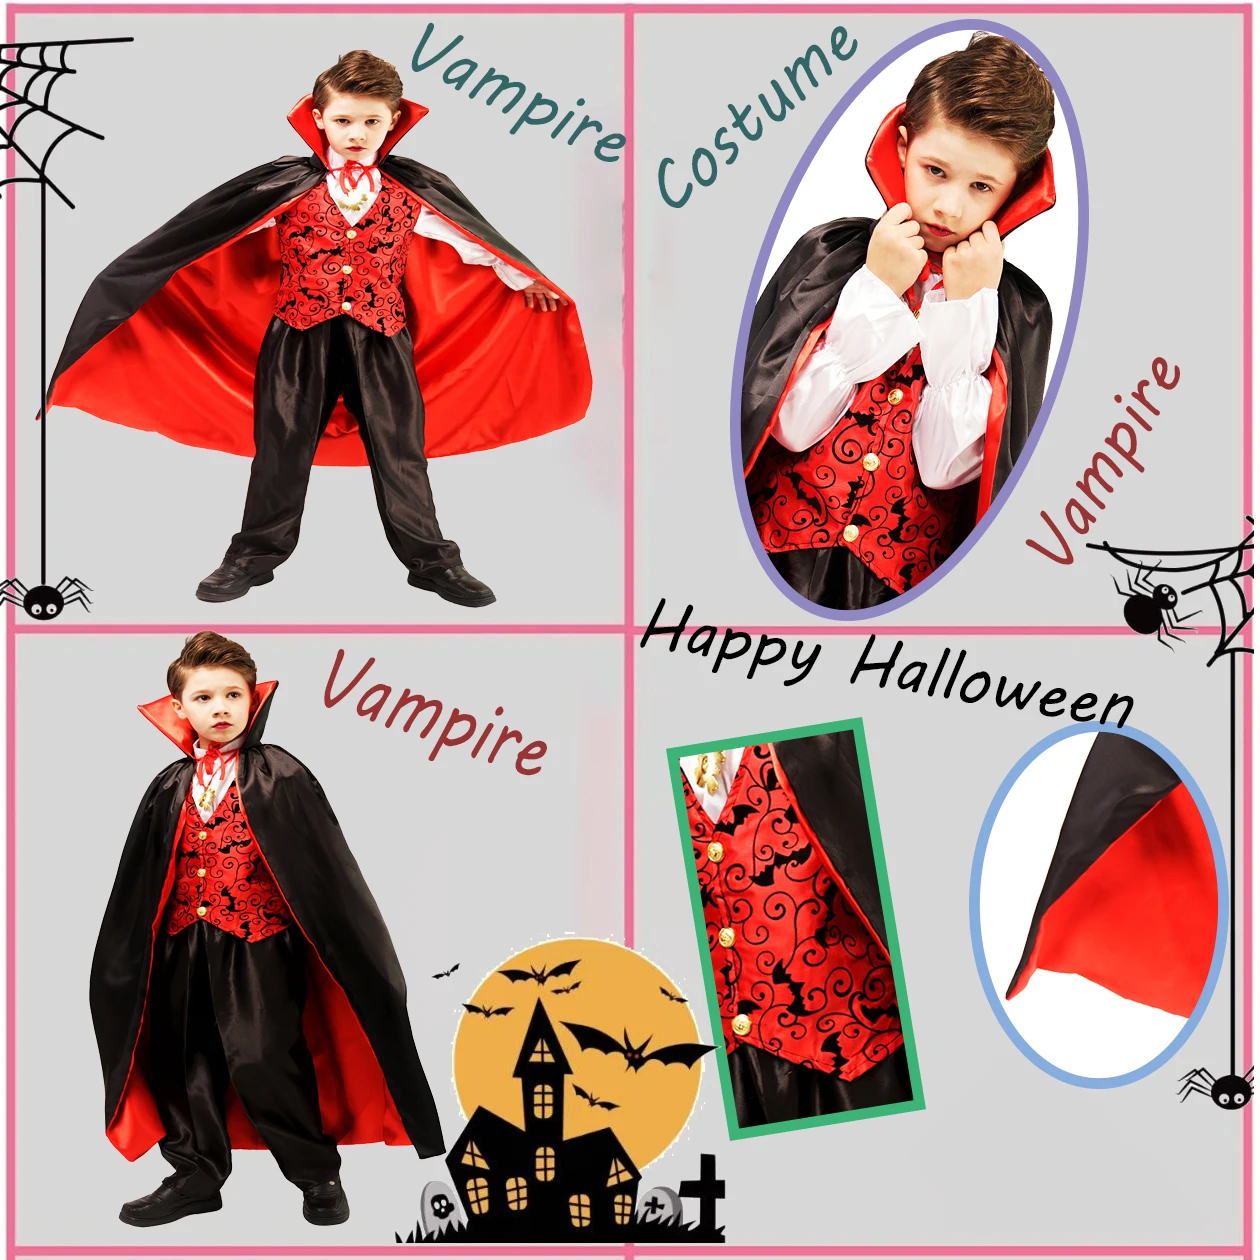 

Vampire Costume Kids Cosplay Gothic Vampire Costume For Boys Scary Purim Halloween Party Role Play Deluxe Clothes With Cape